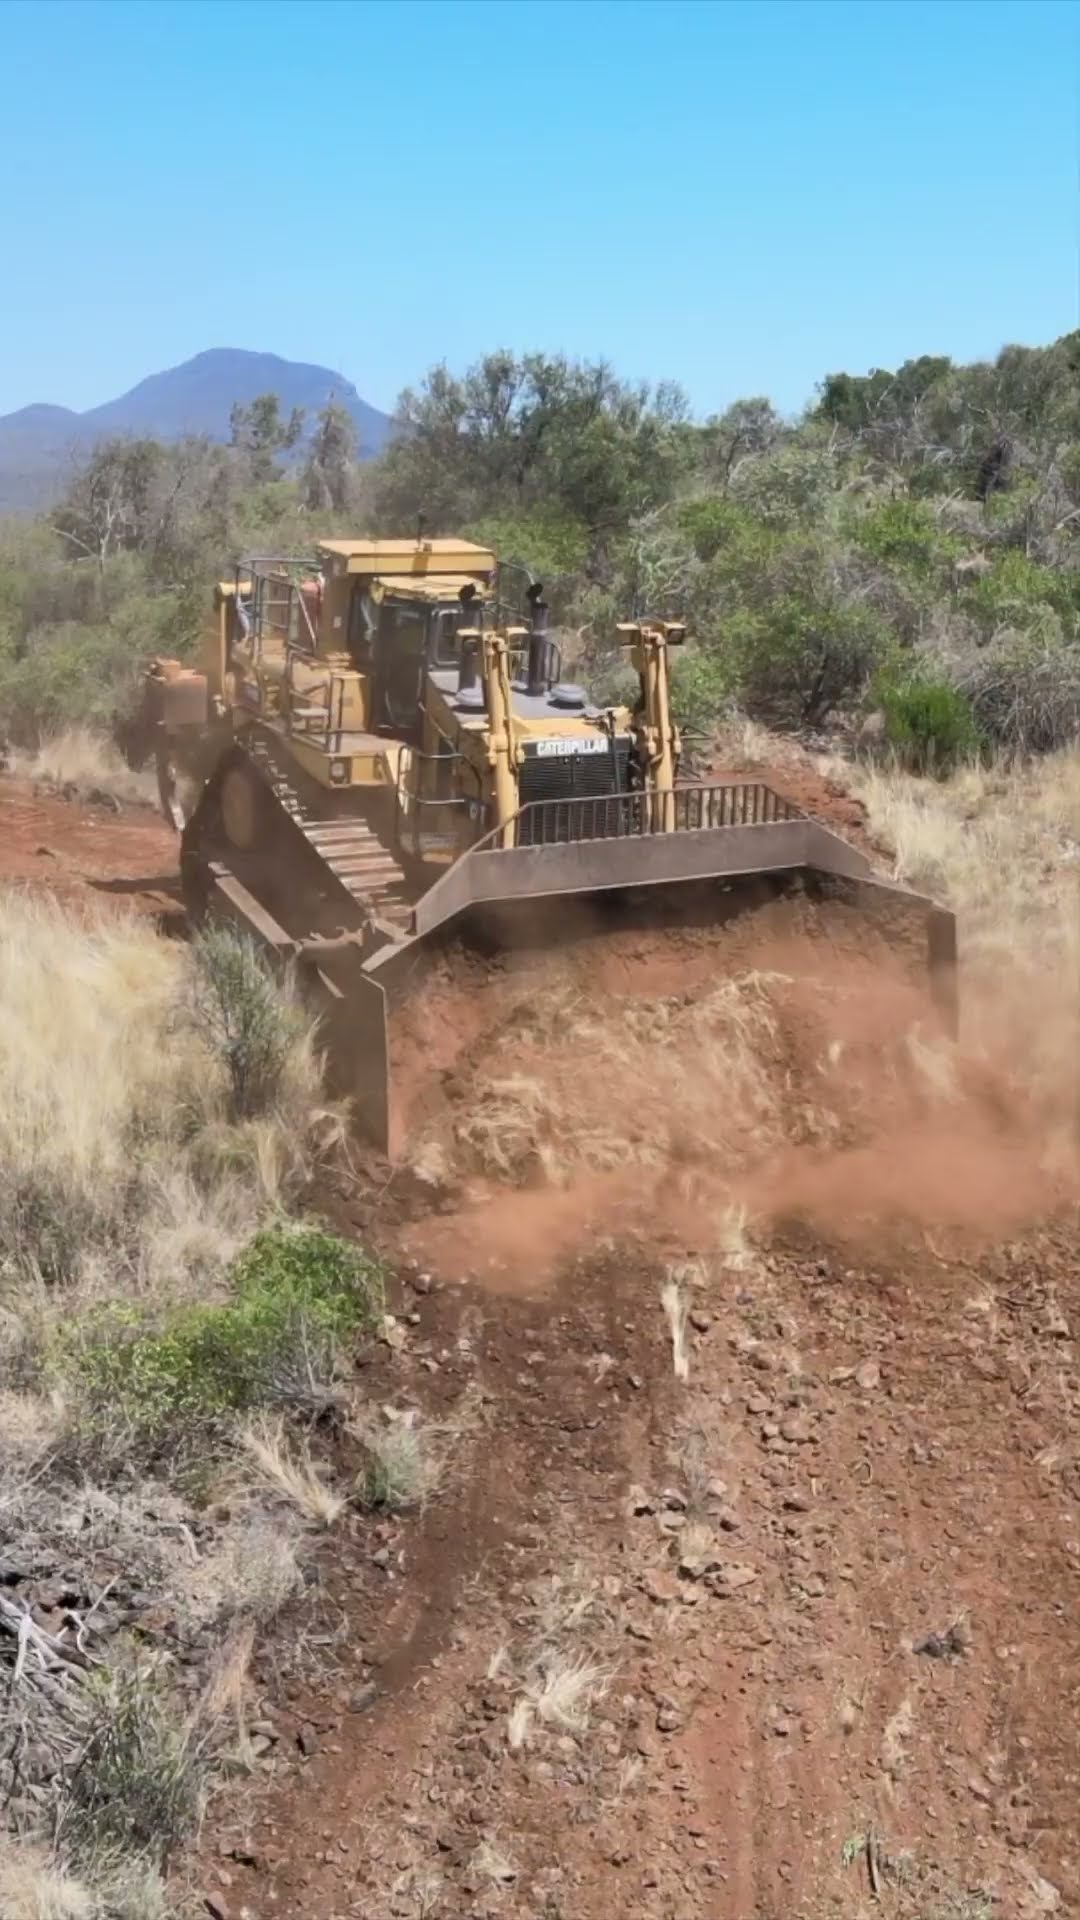 Excellence! Bulldozer Power Force Pushing Dirt Operator's Expertise in Unloading Dirt and Pushing